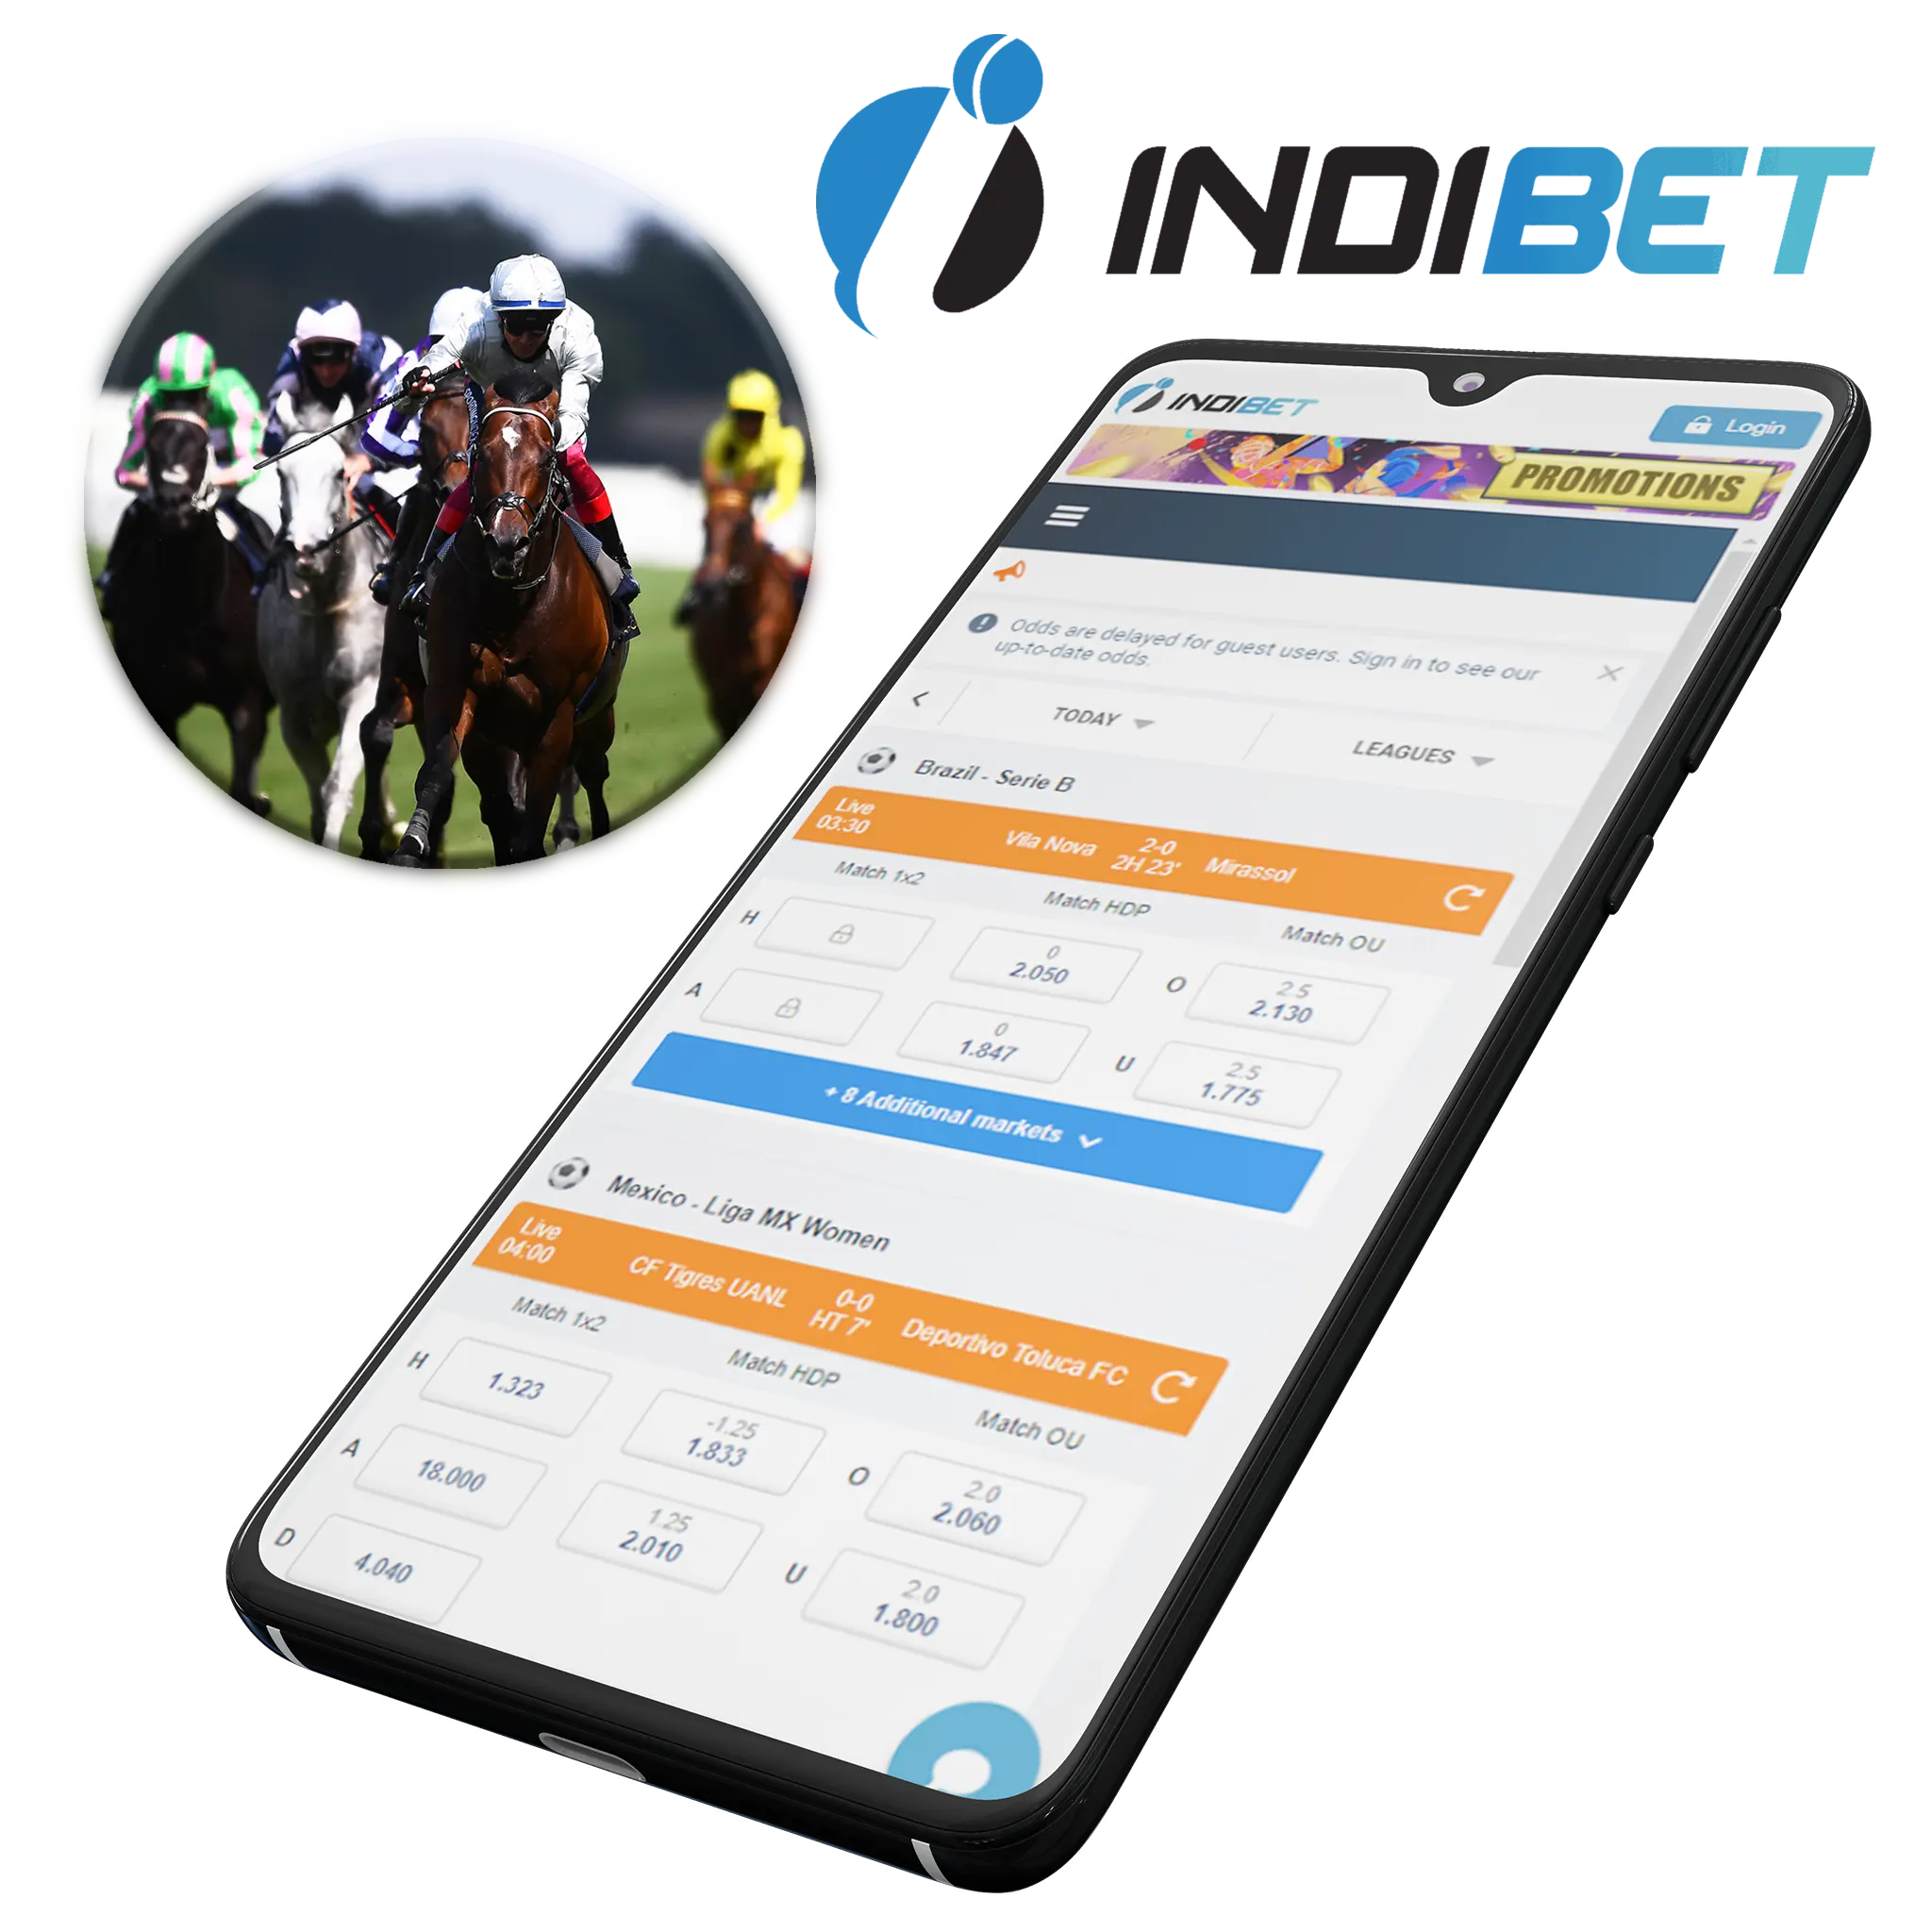 The Mostbet app has key advantages for horse racing betting.